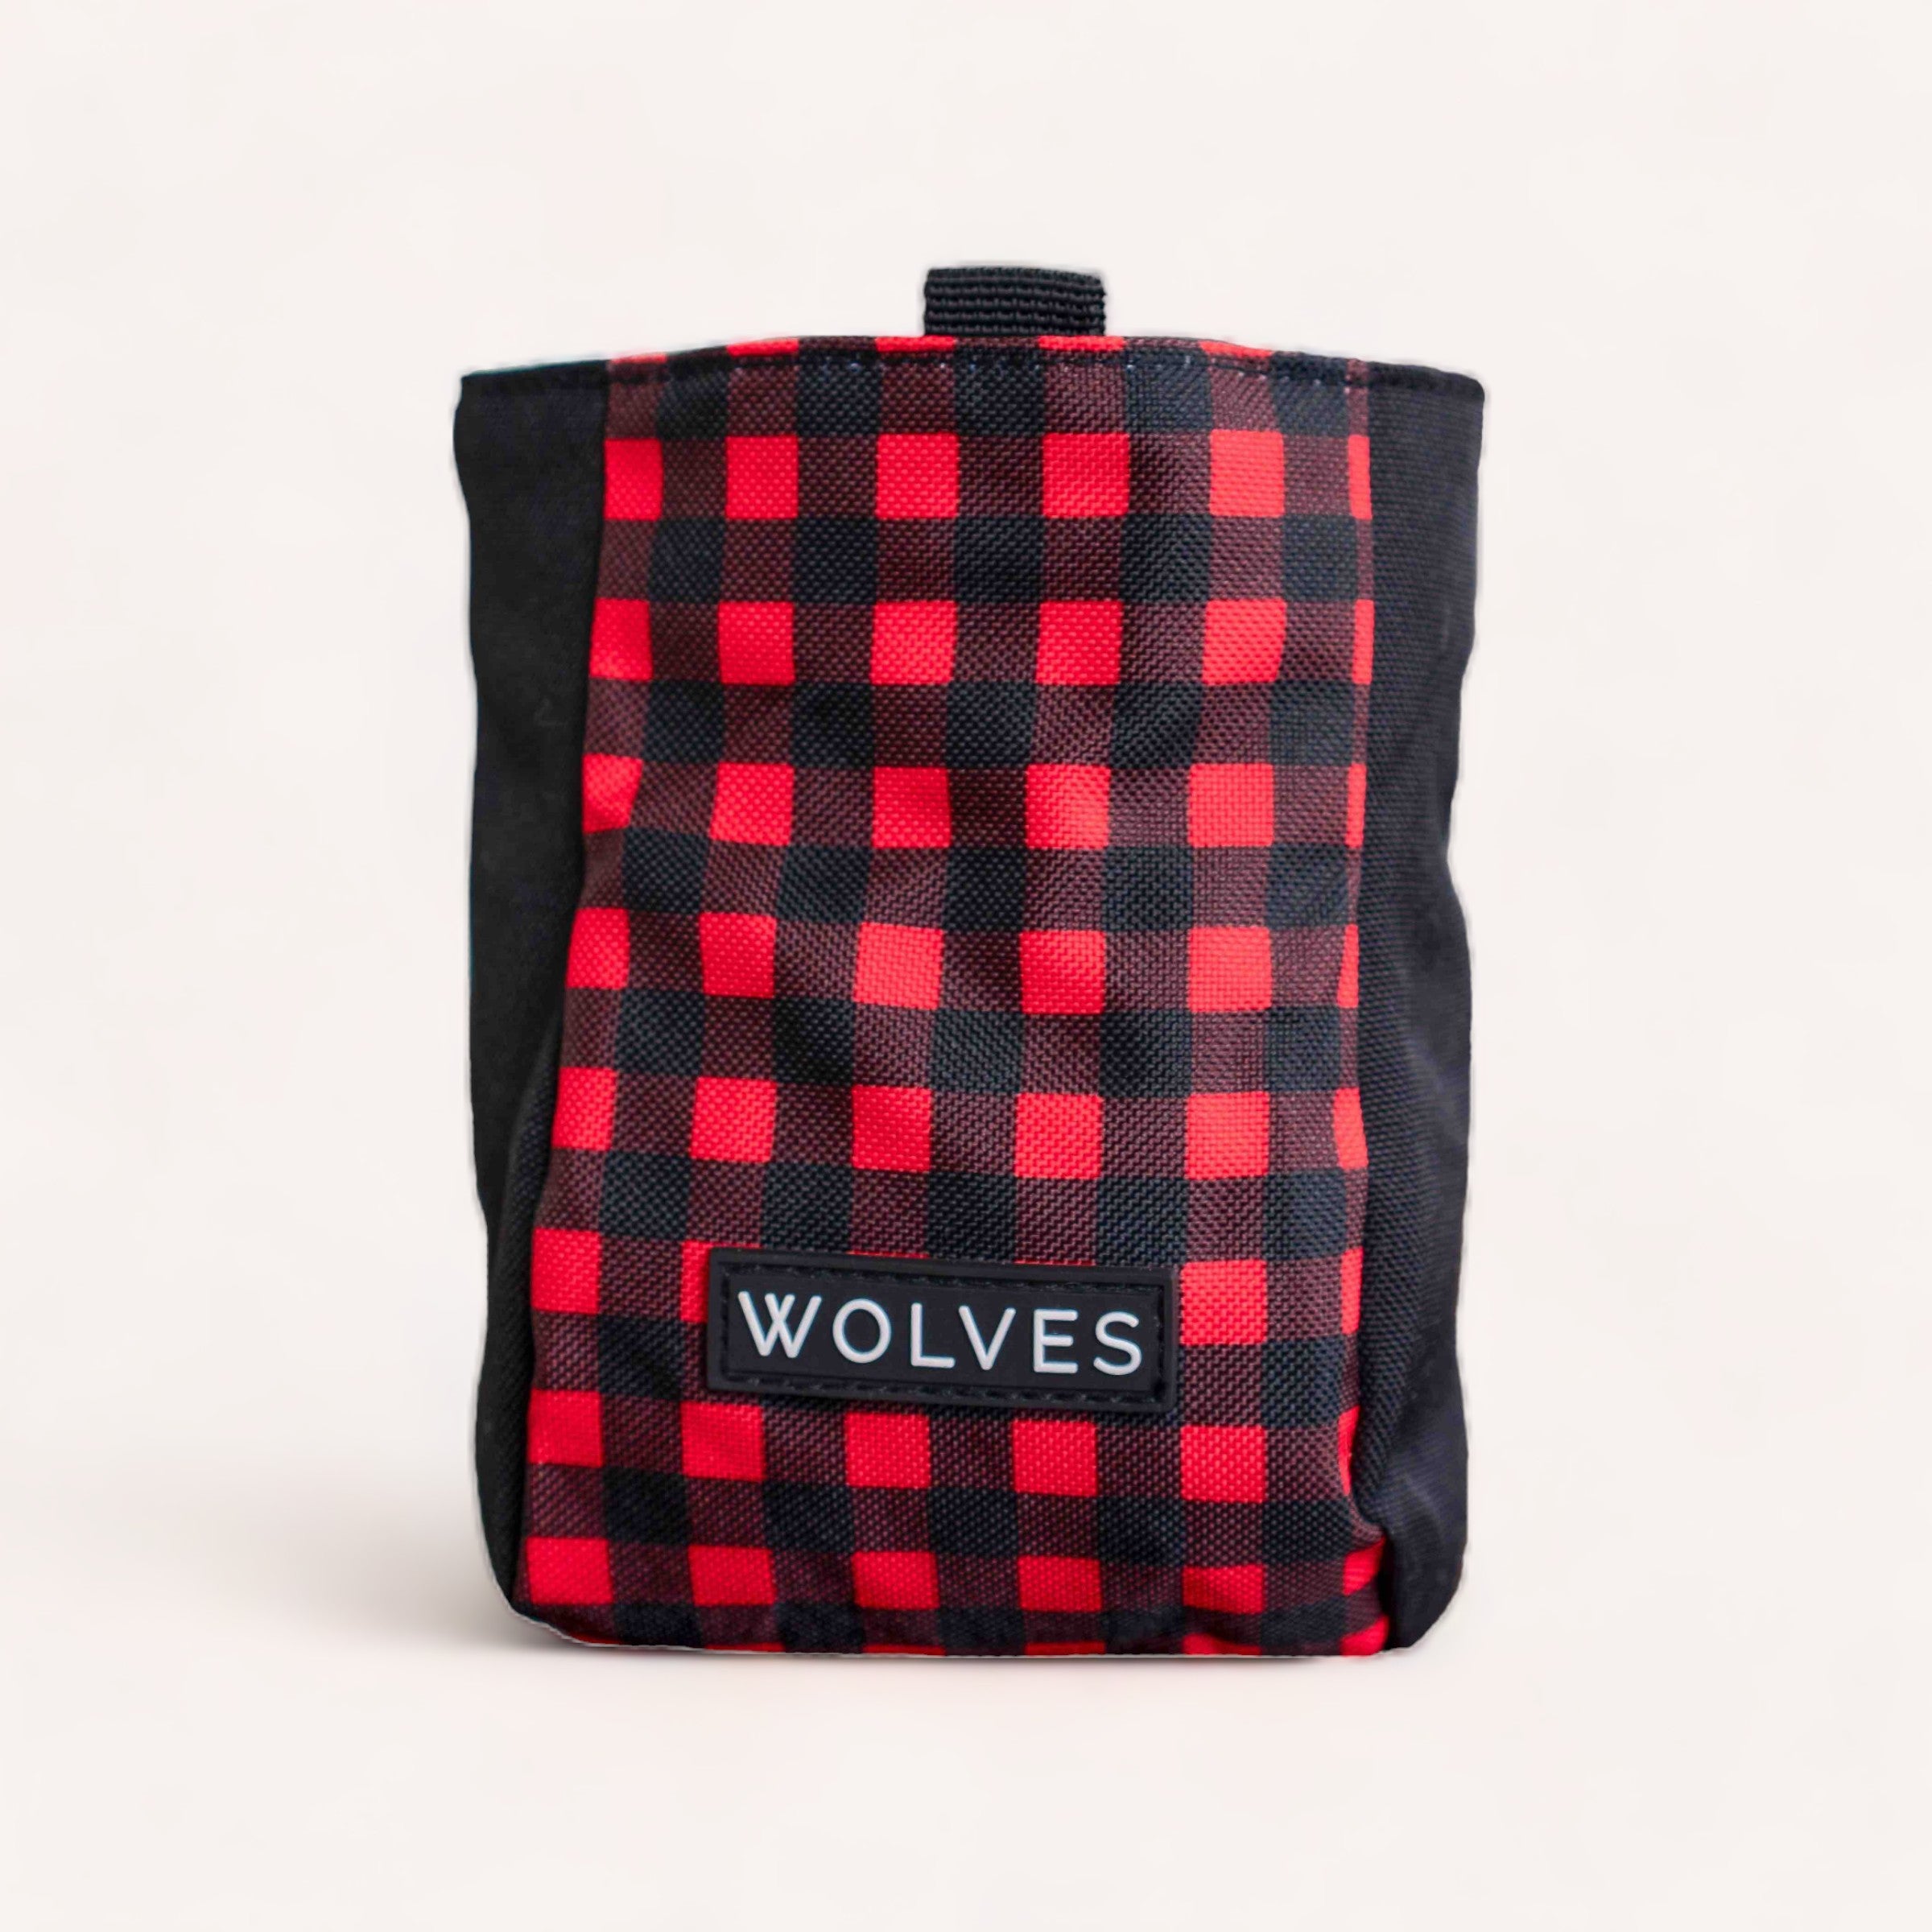 A durable red and black checkered Buffalo Treat Pouch with the word "wolves" on a label by Wolves of Wellington.